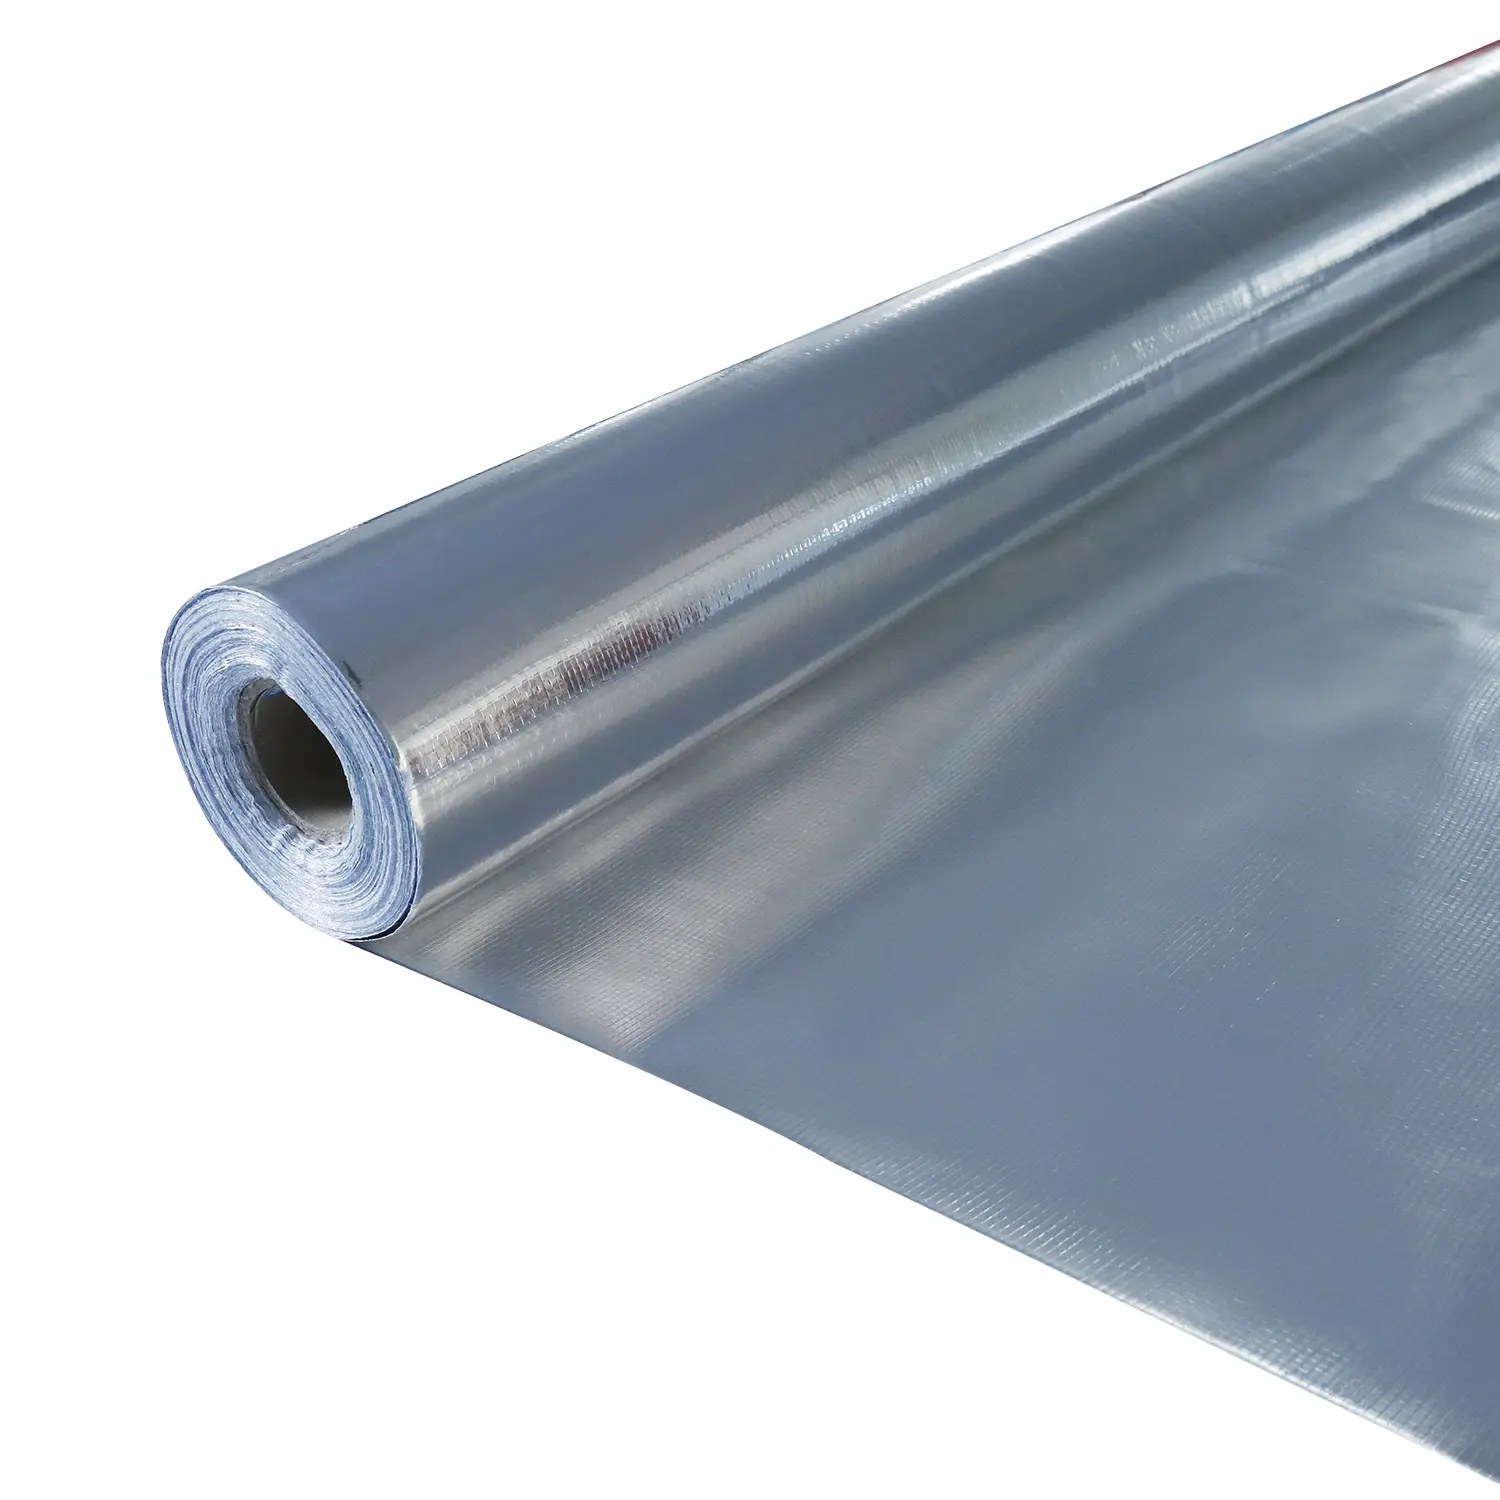 Wall Wrap Vapor Barrier Radiant Barrier Aluminum Foil Woven Fabric As Ceiling Insulation In Poultry House